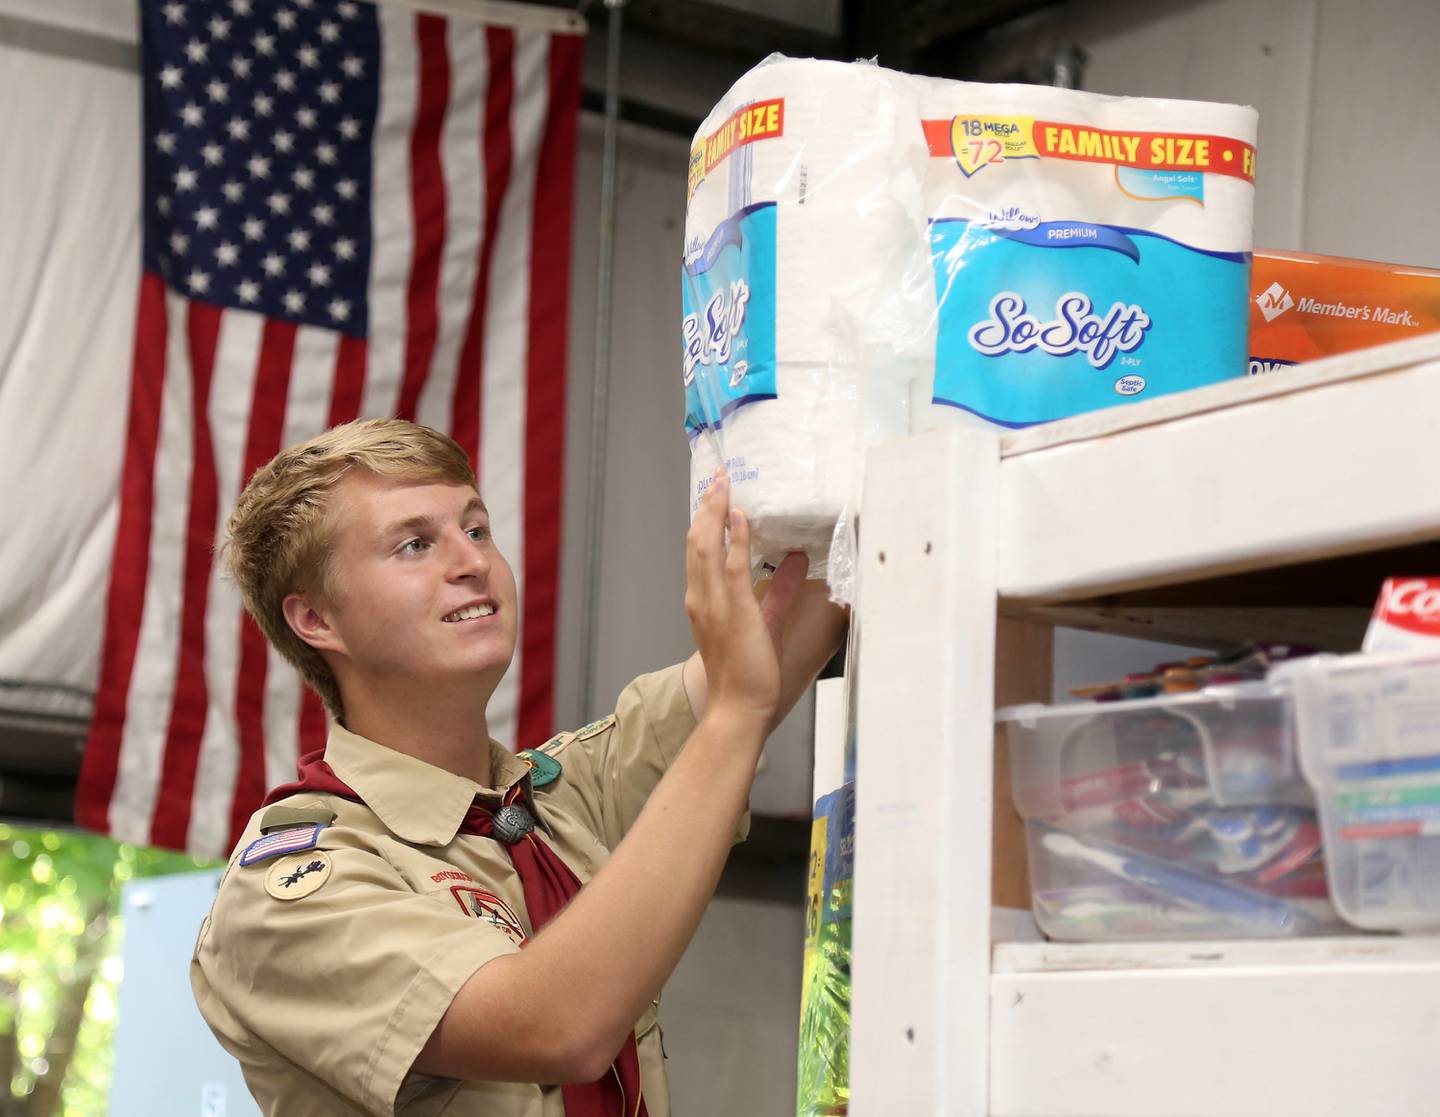 Billy Eby stocks items on shelves he built as his Eagle Scout Project at Between Friends Food Pantry of Sugar Grove on Wednesday, June 8, 2022.